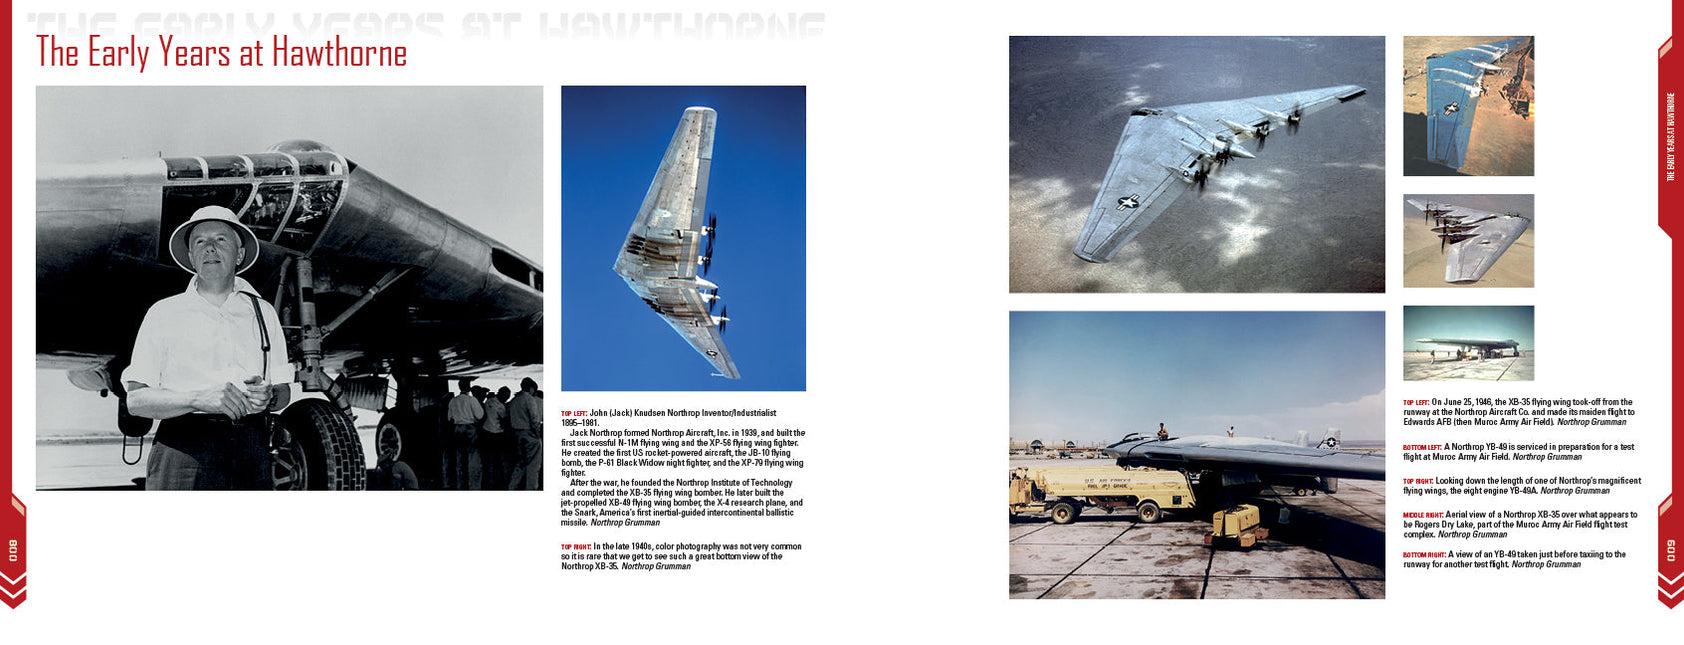 A Pictorial History of the B-2A Spirit Stealth Bomber by Schiffer Publishing